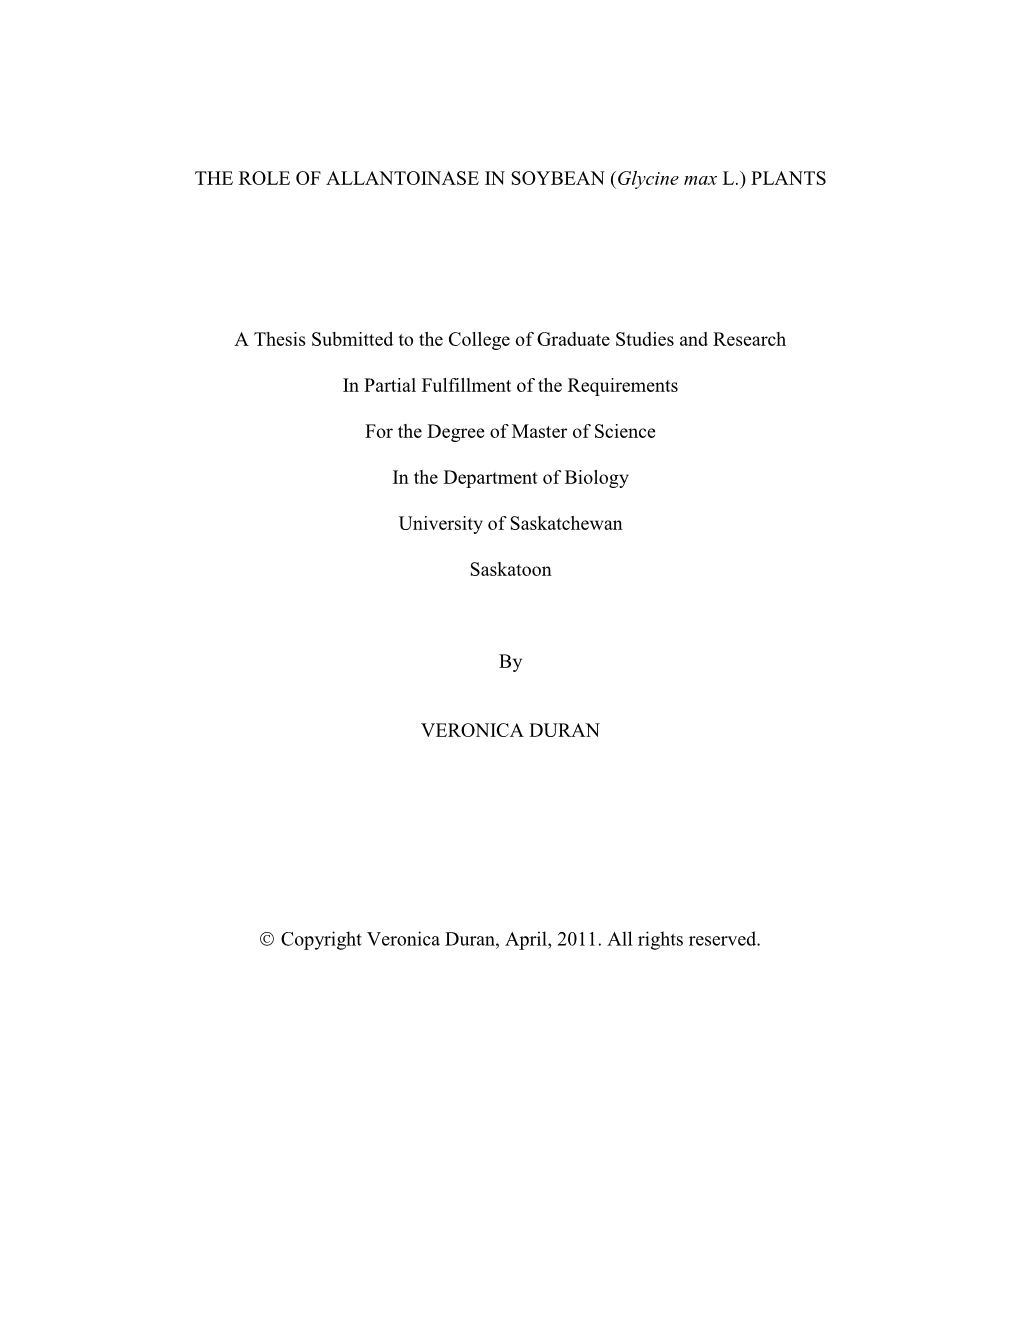 THE ROLE of ALLANTOINASE in SOYBEAN (Glycine Max L.) PLANTS a Thesis Submitted to the College of Graduate Studies and Research I